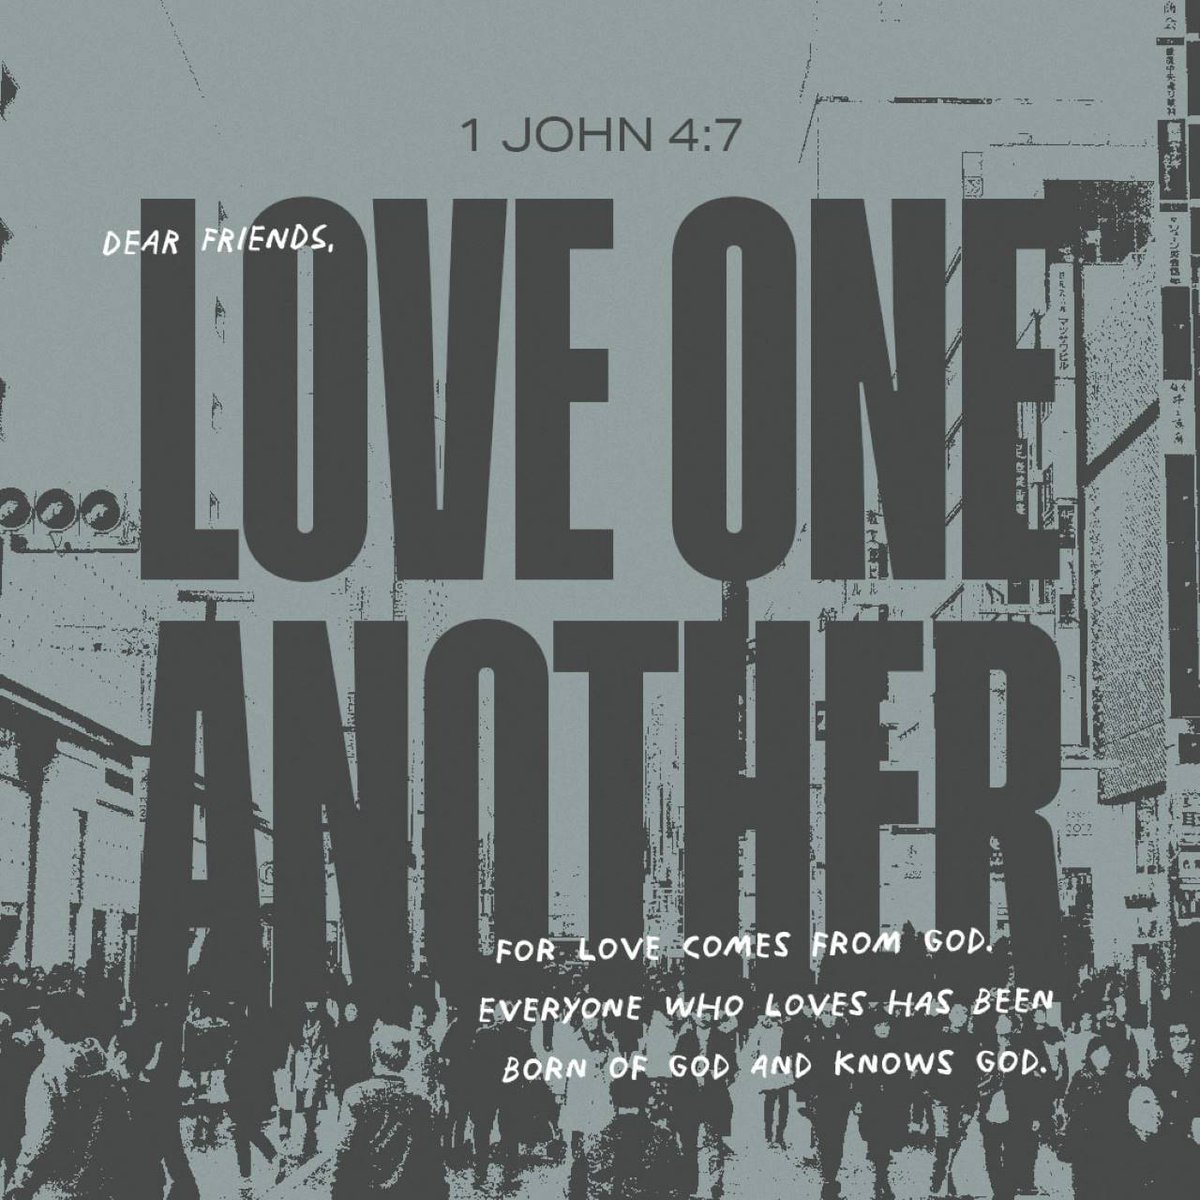 'Dear friends, let us love one another, for love comes from God. Everyone who loves has been born of God and knows God. ' 1 John 4:7 NIV #VerseoftheDay #wednesdayvibes #wednesdaythought #love #wednesdaywisdom #loveoneanother #wednesdaymotivation